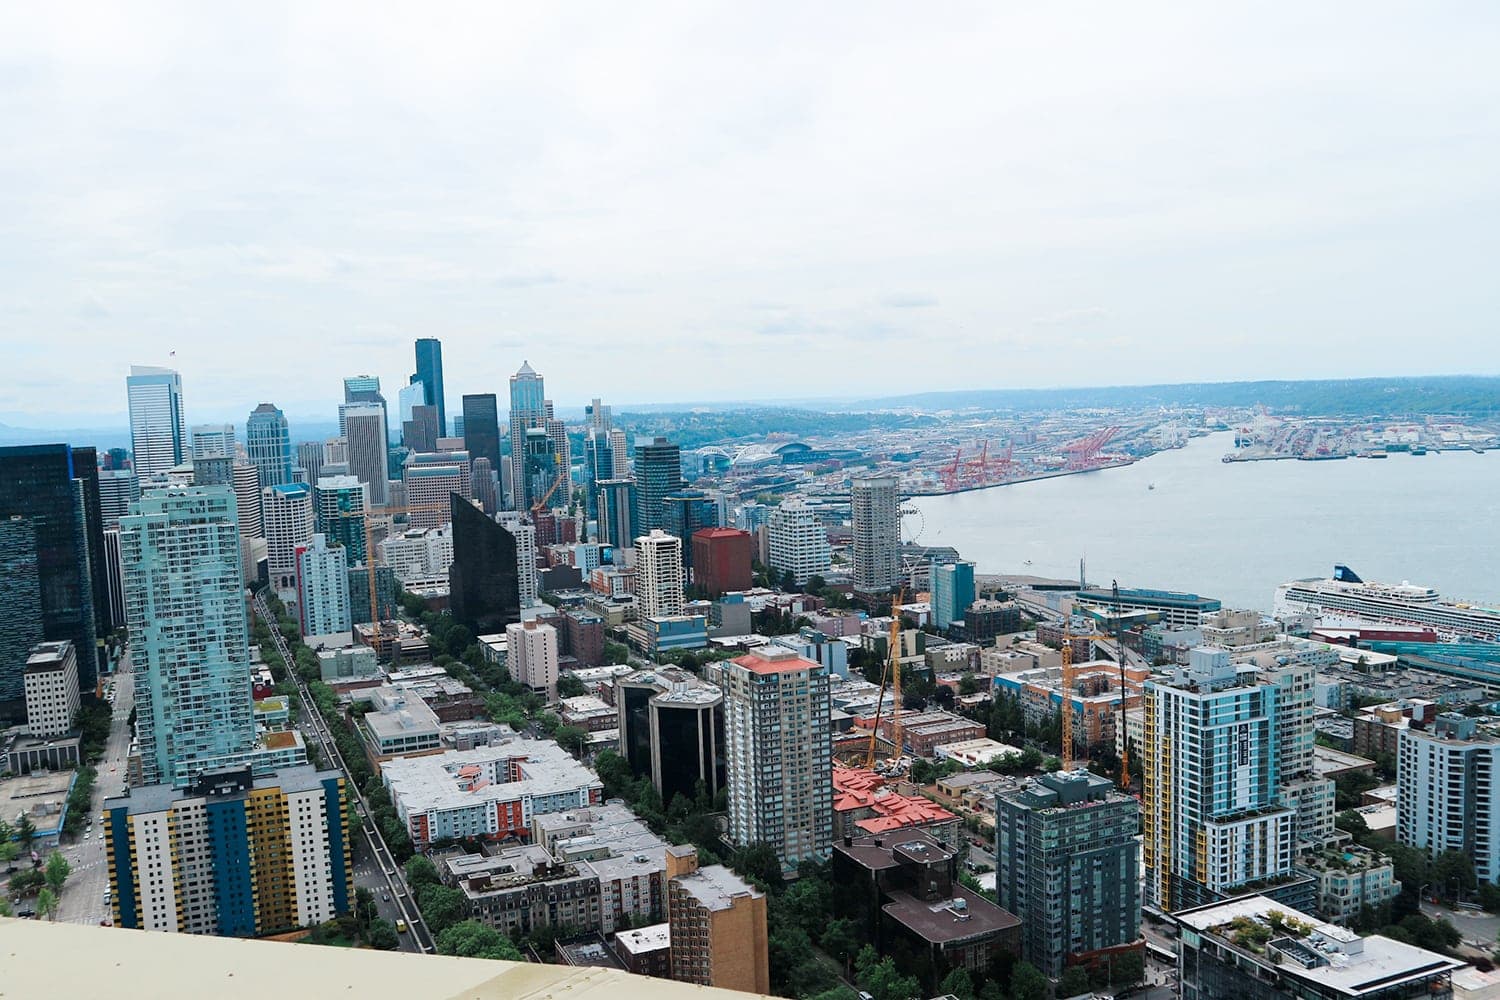 Seattle Travel Guide: Seattle with Kids by popular lifestyle blogger Meg O. on the Go